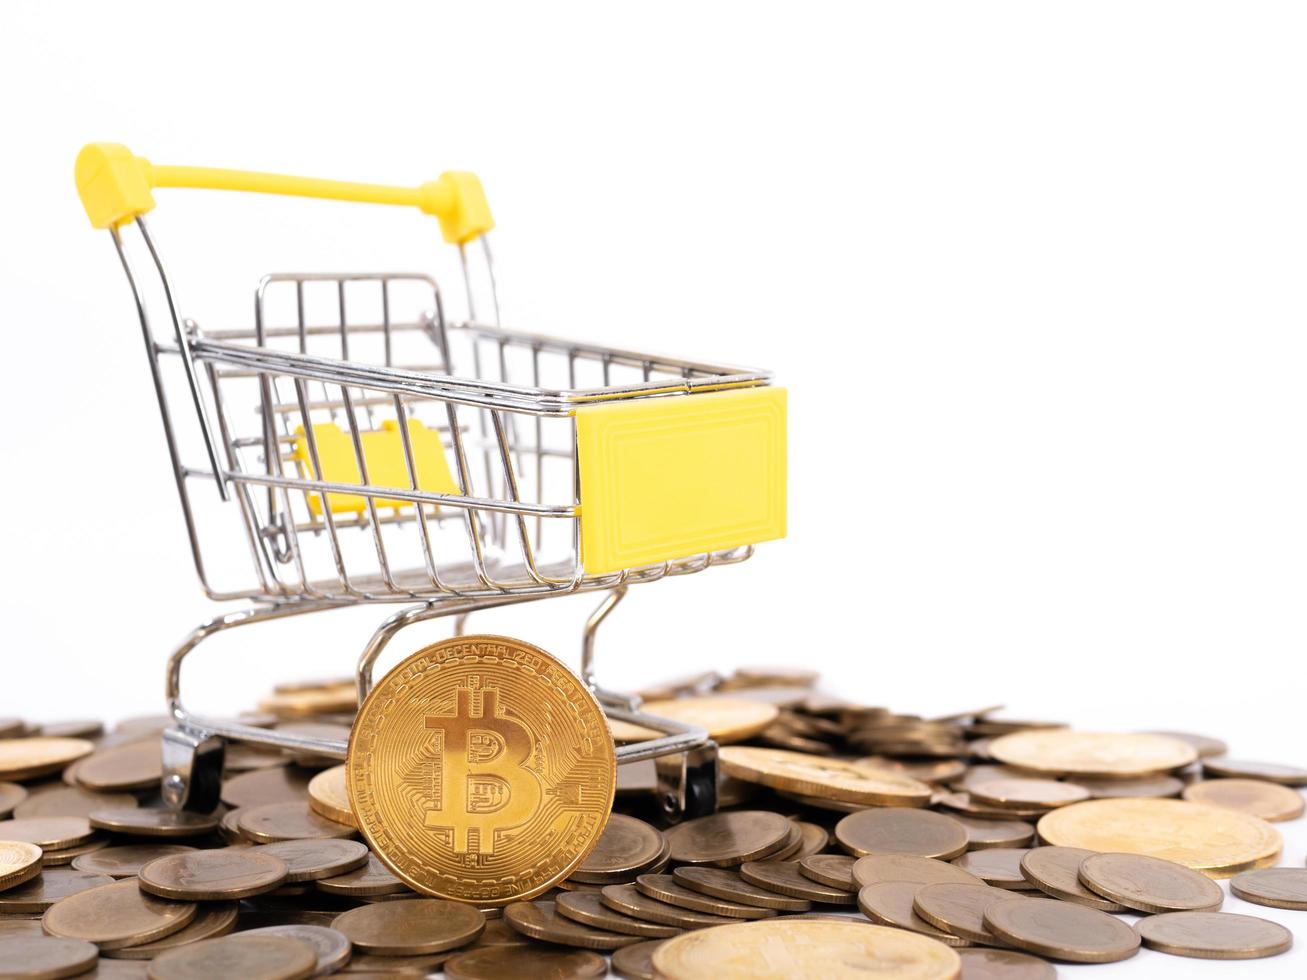 Pay crypto currency  the supermarket cart is filled with gold coins of bitcoin on a white background. Copy space photo